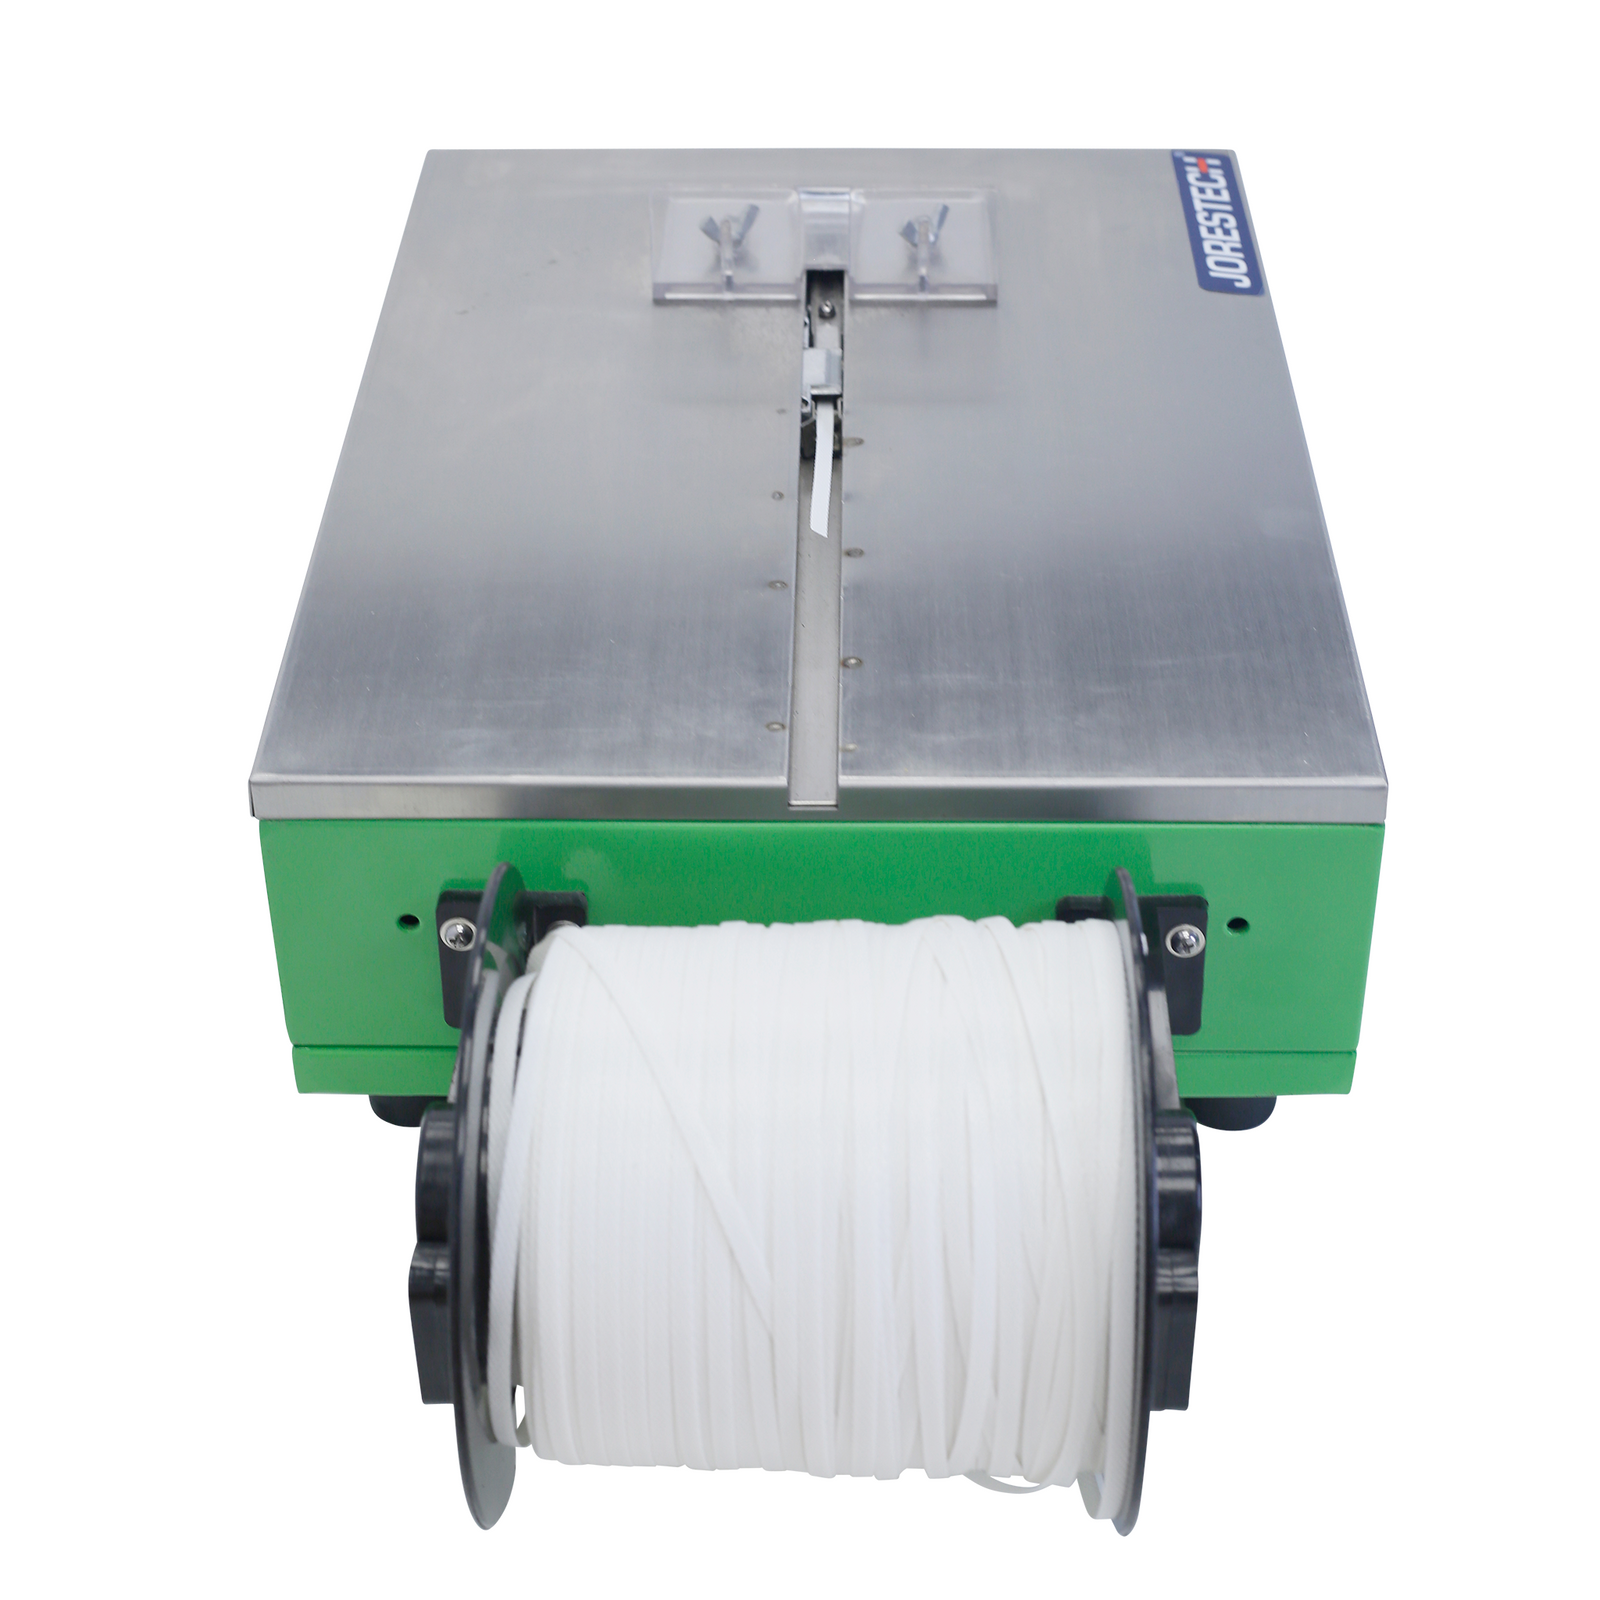 Top view of the JORESTECH® Tabletop strapper machine shows the machine's stainless steel work table. Strapping roll is installed on the machine